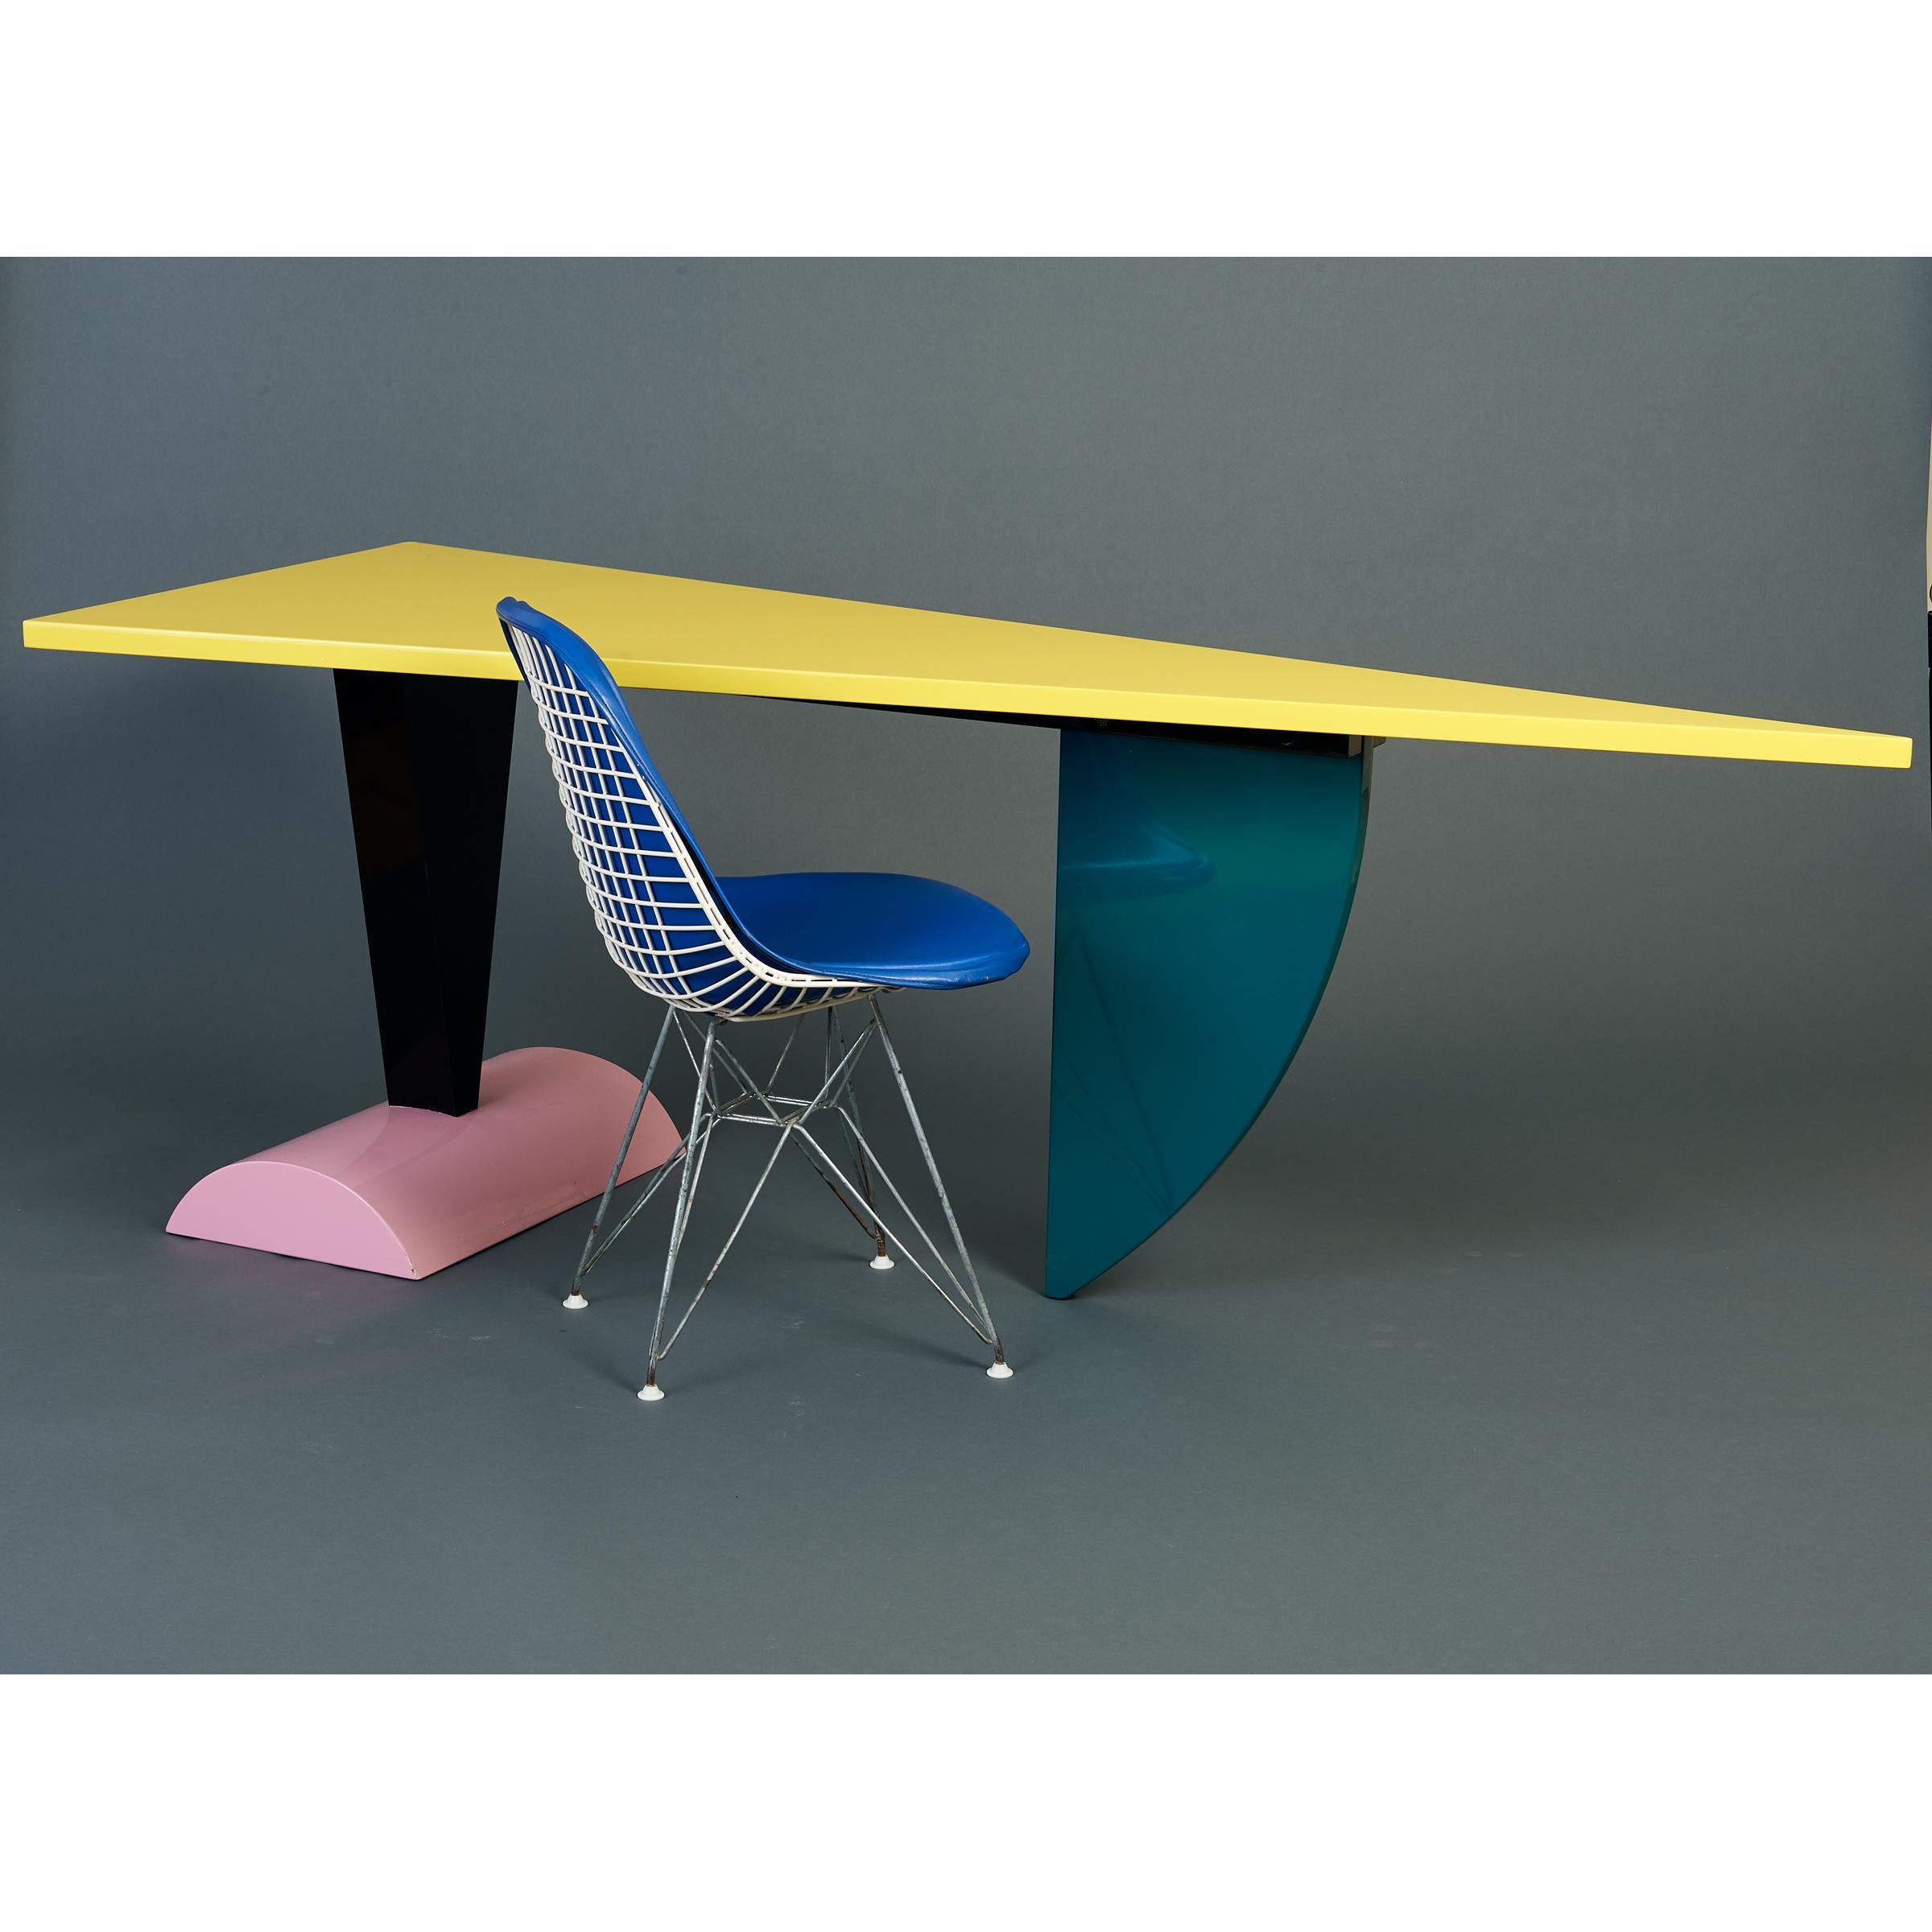 Peter Shire: Original Memphis Milano Brazil Table in Lacquered Wood, Italy 1981 (Moderne der Mitte des Jahrhunderts) im Angebot